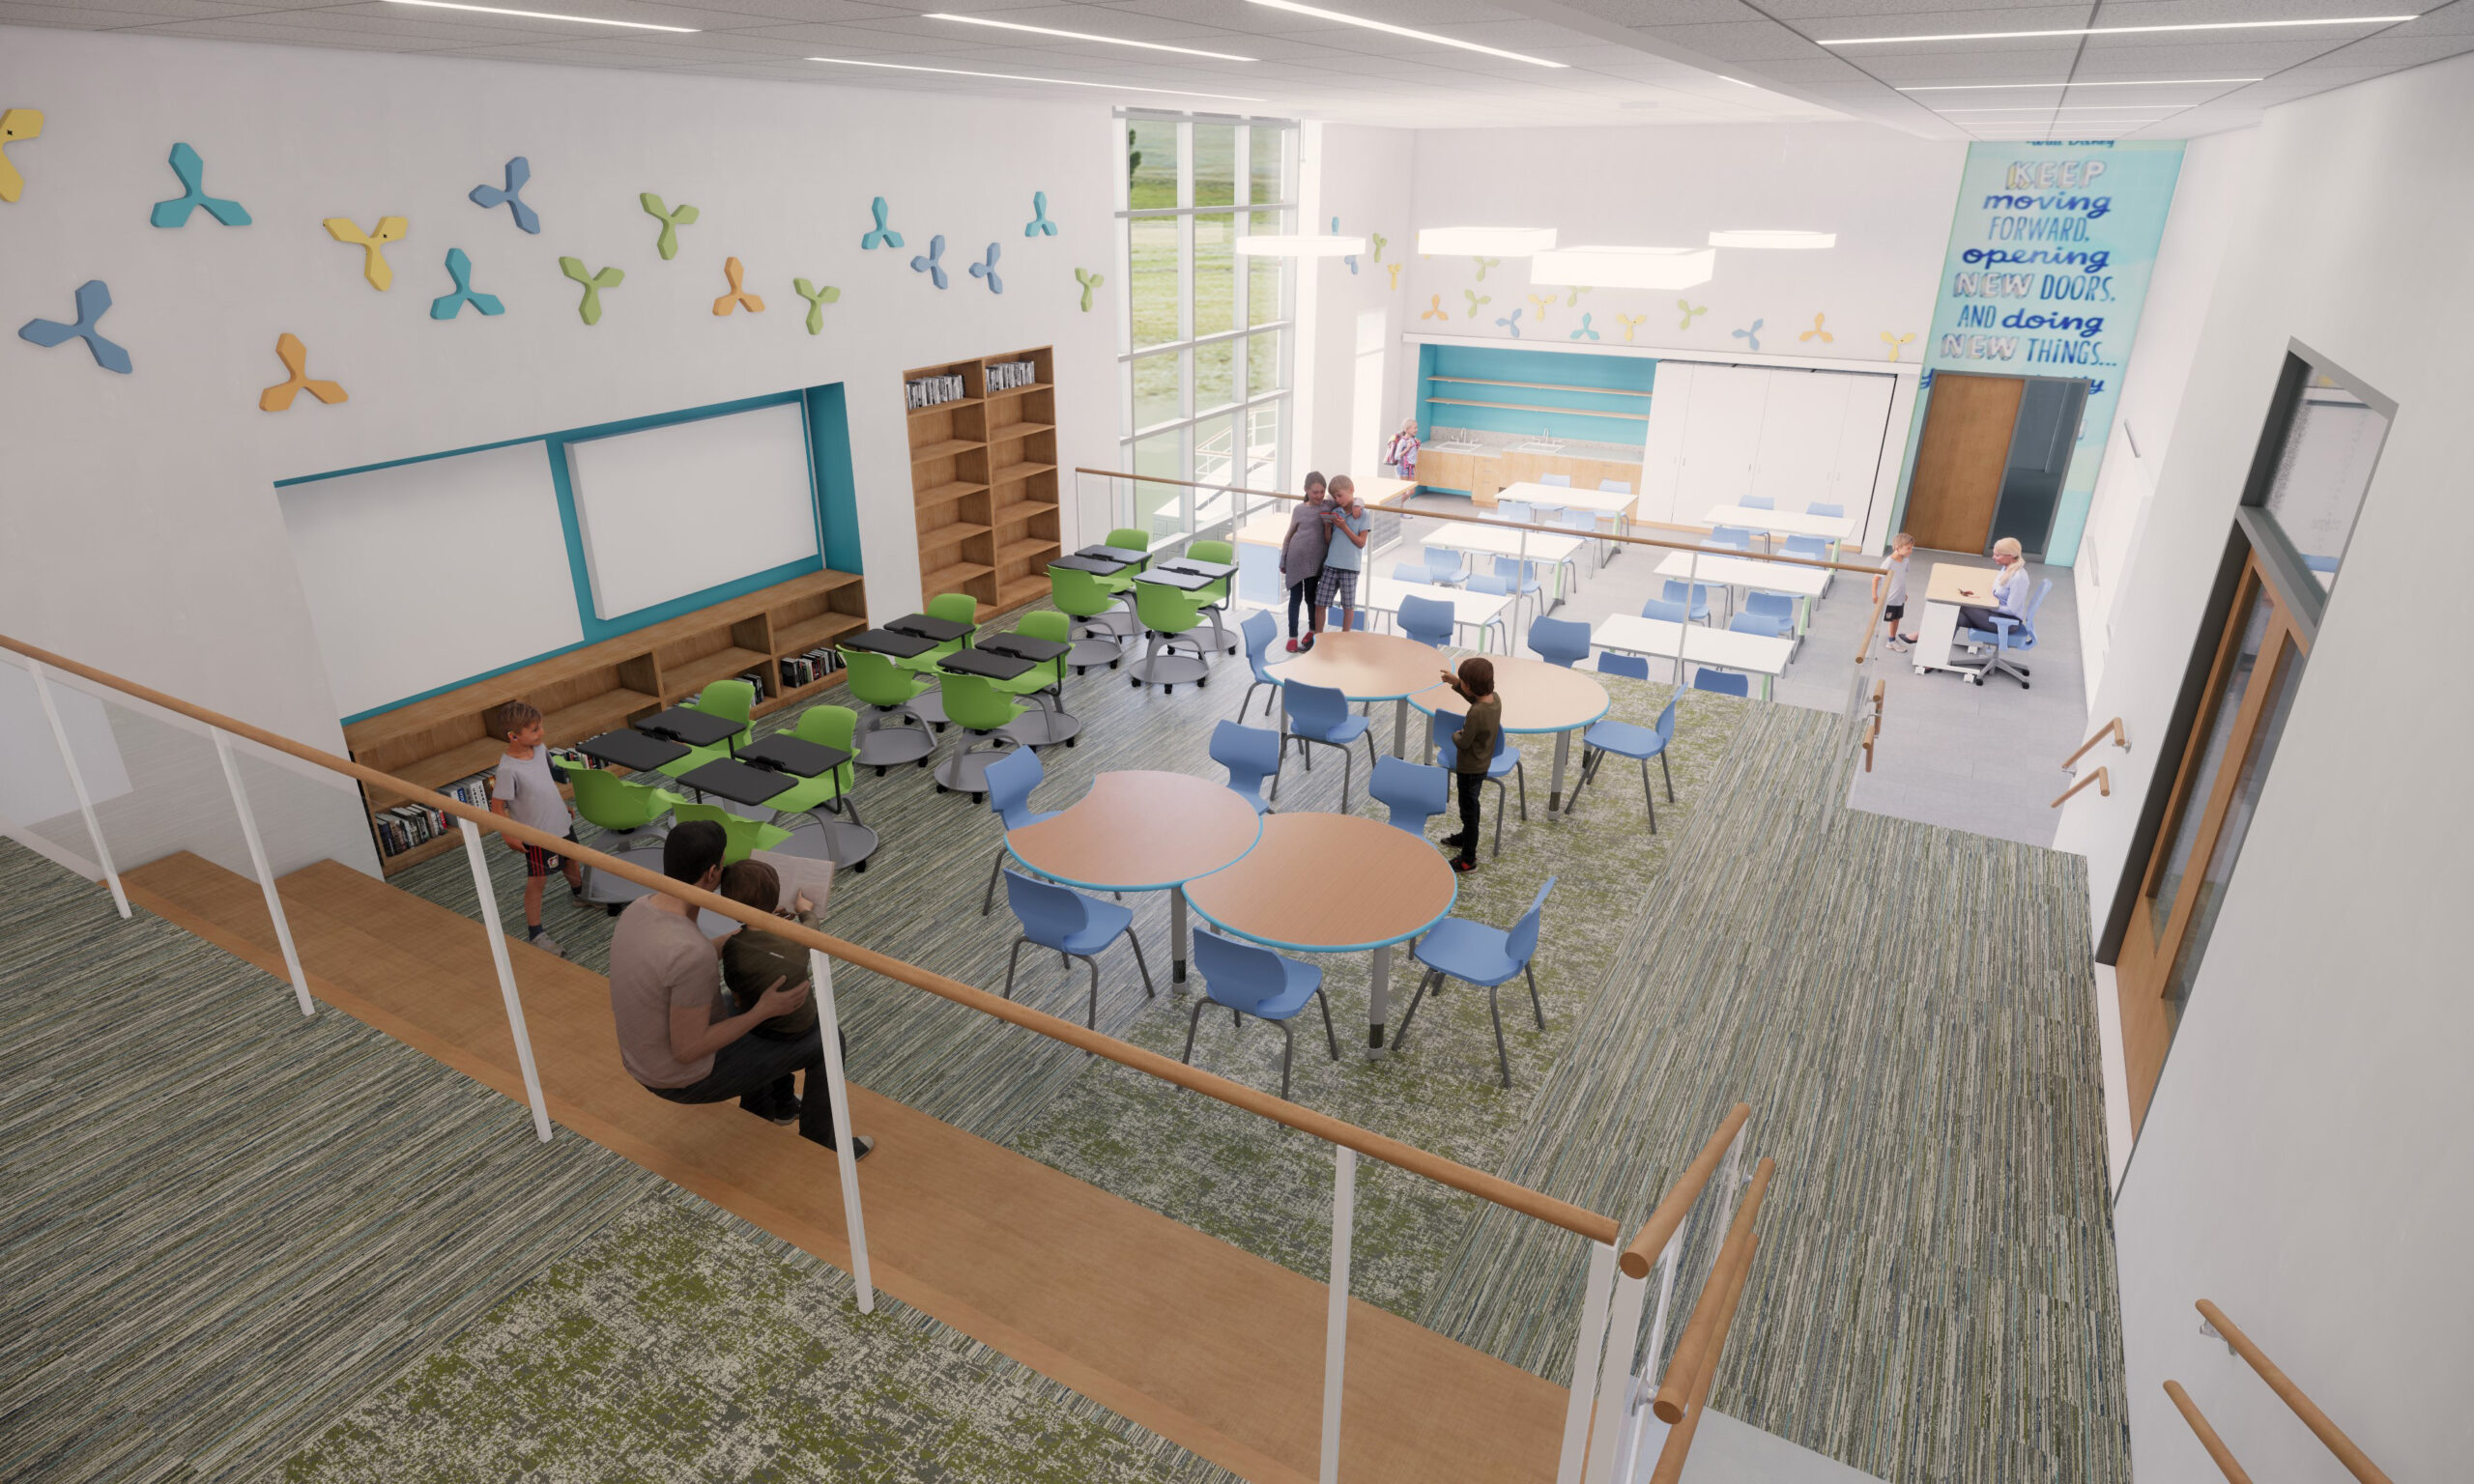 <p>View from within the media center overlooking the classroom and discover/maker environment.</p>
